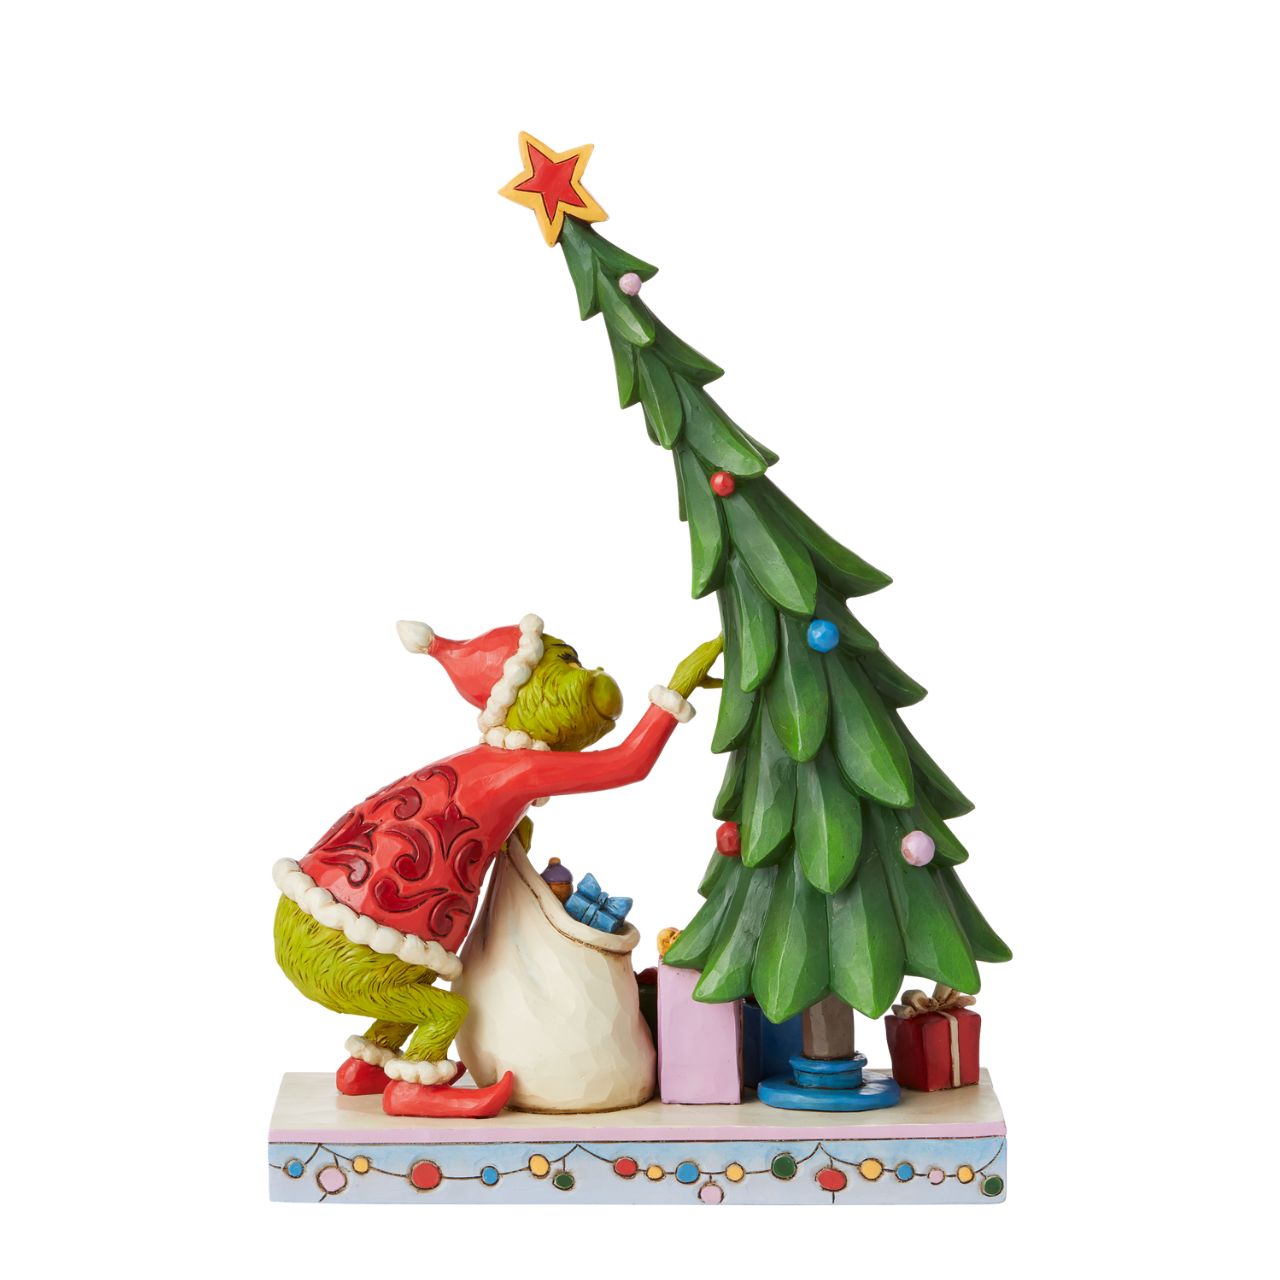 Grinch Undecorating Tree Figurine - The Grinch by Jim Shore  Award winning artist Jim Shore has created a piece that shows the iconic Grinch up to no good. The Grinch is mid-heist in this dazzling Jim Shore figurine. He deposits ornaments into his bag with that mischievous grin. Dressed as Santa, the Grinch takes gifts rather than gives them, but he'll surely bring your home some festivity.